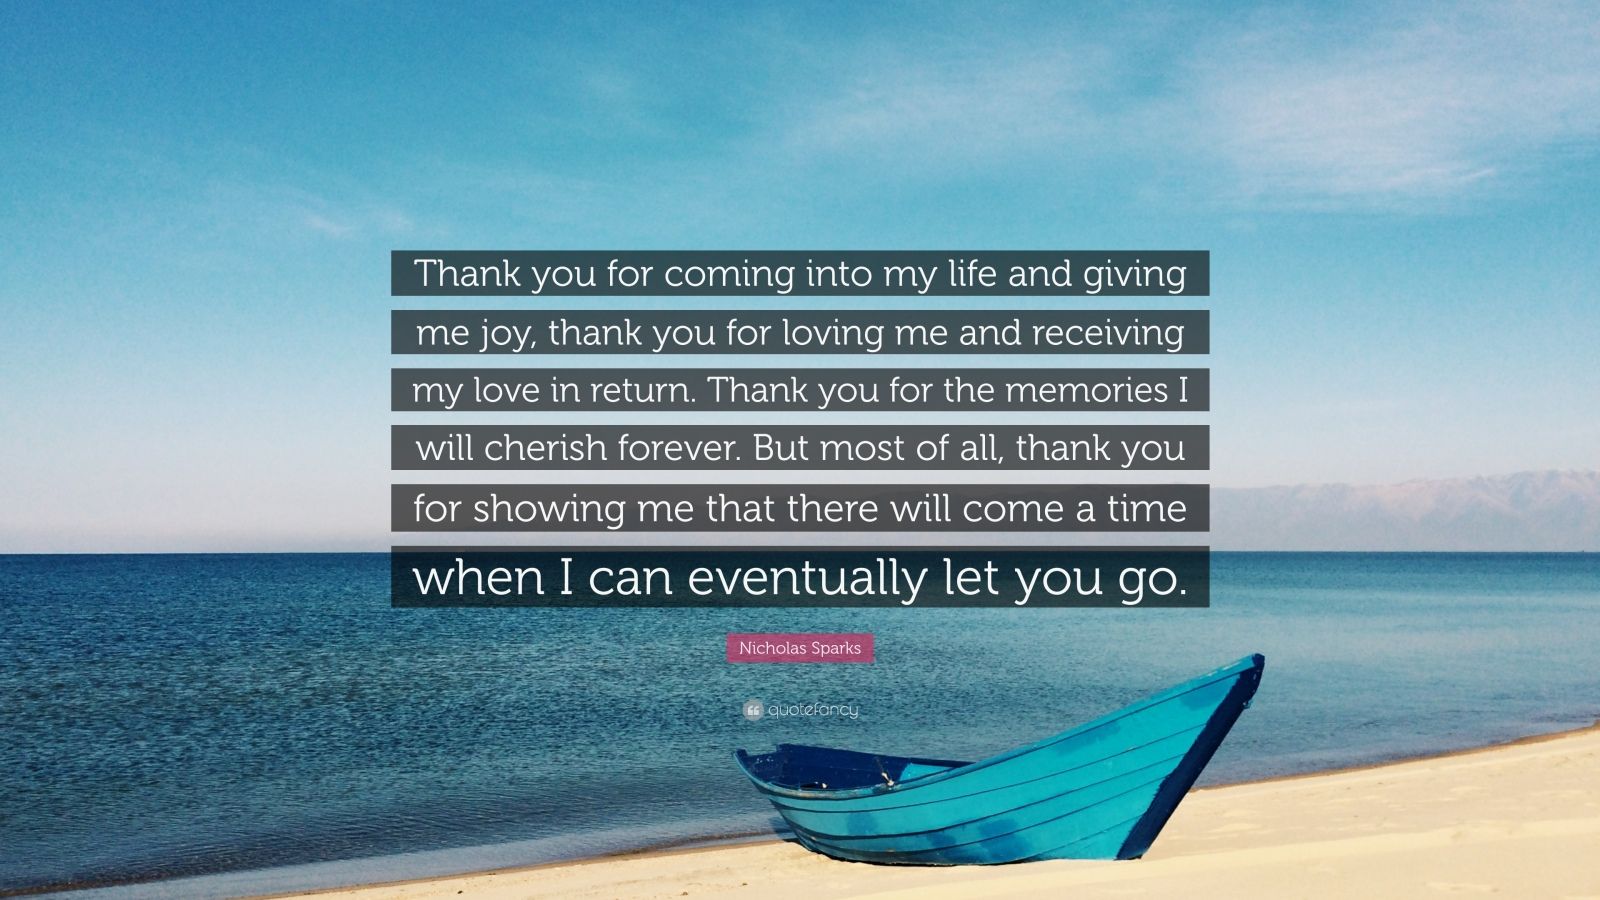 Nicholas Sparks Quote “Thank you for coming into my life